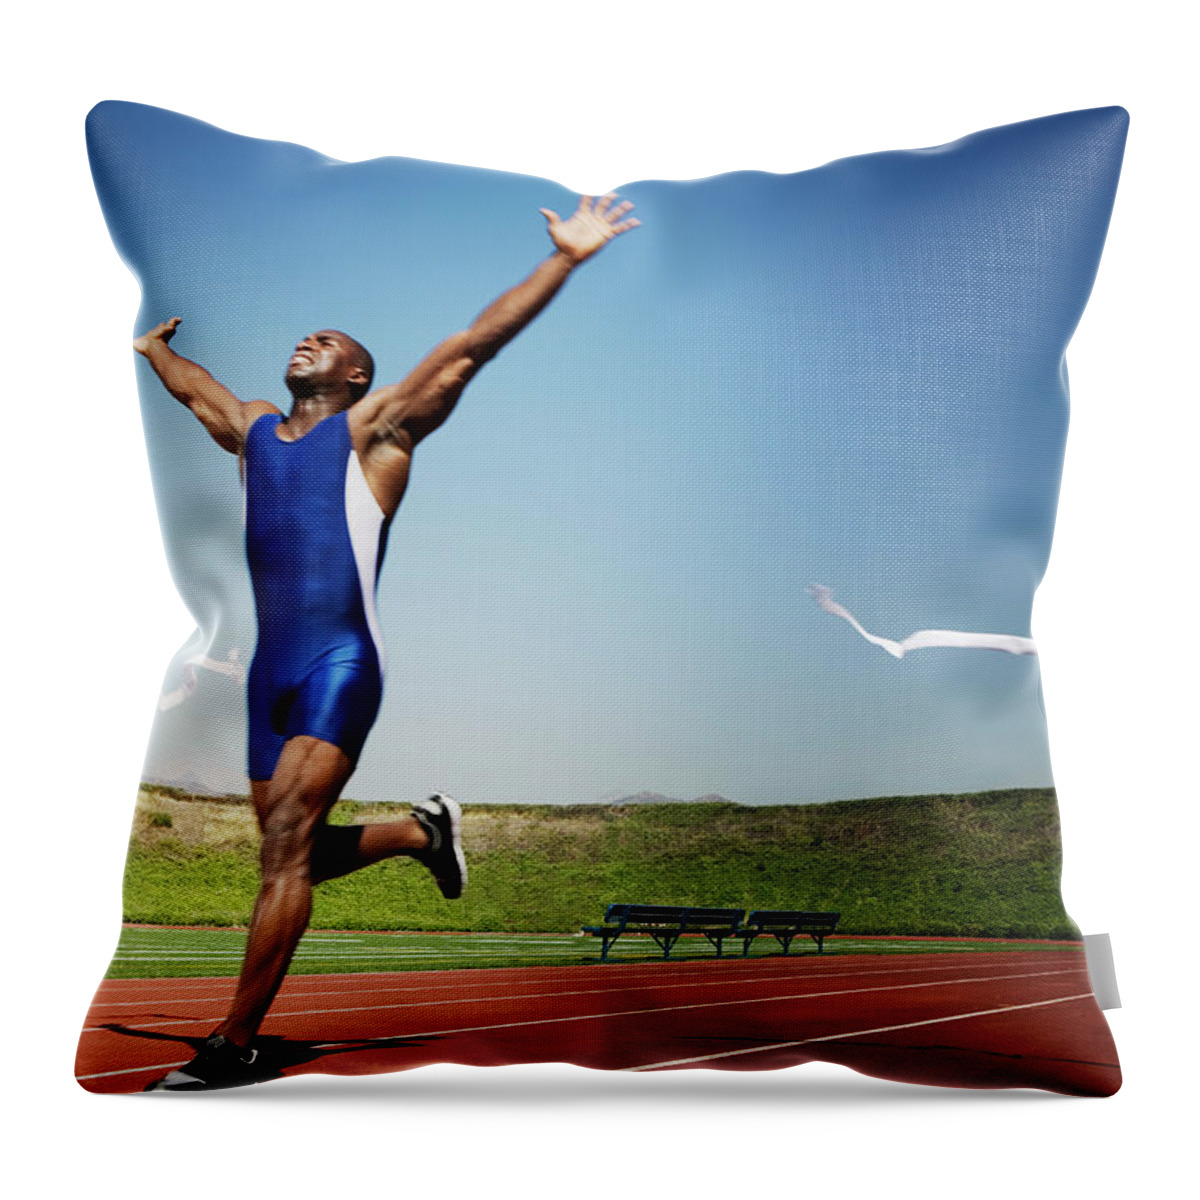 Human Arm Throw Pillow featuring the photograph Runner Crossing Finish Line by Jupiterimages